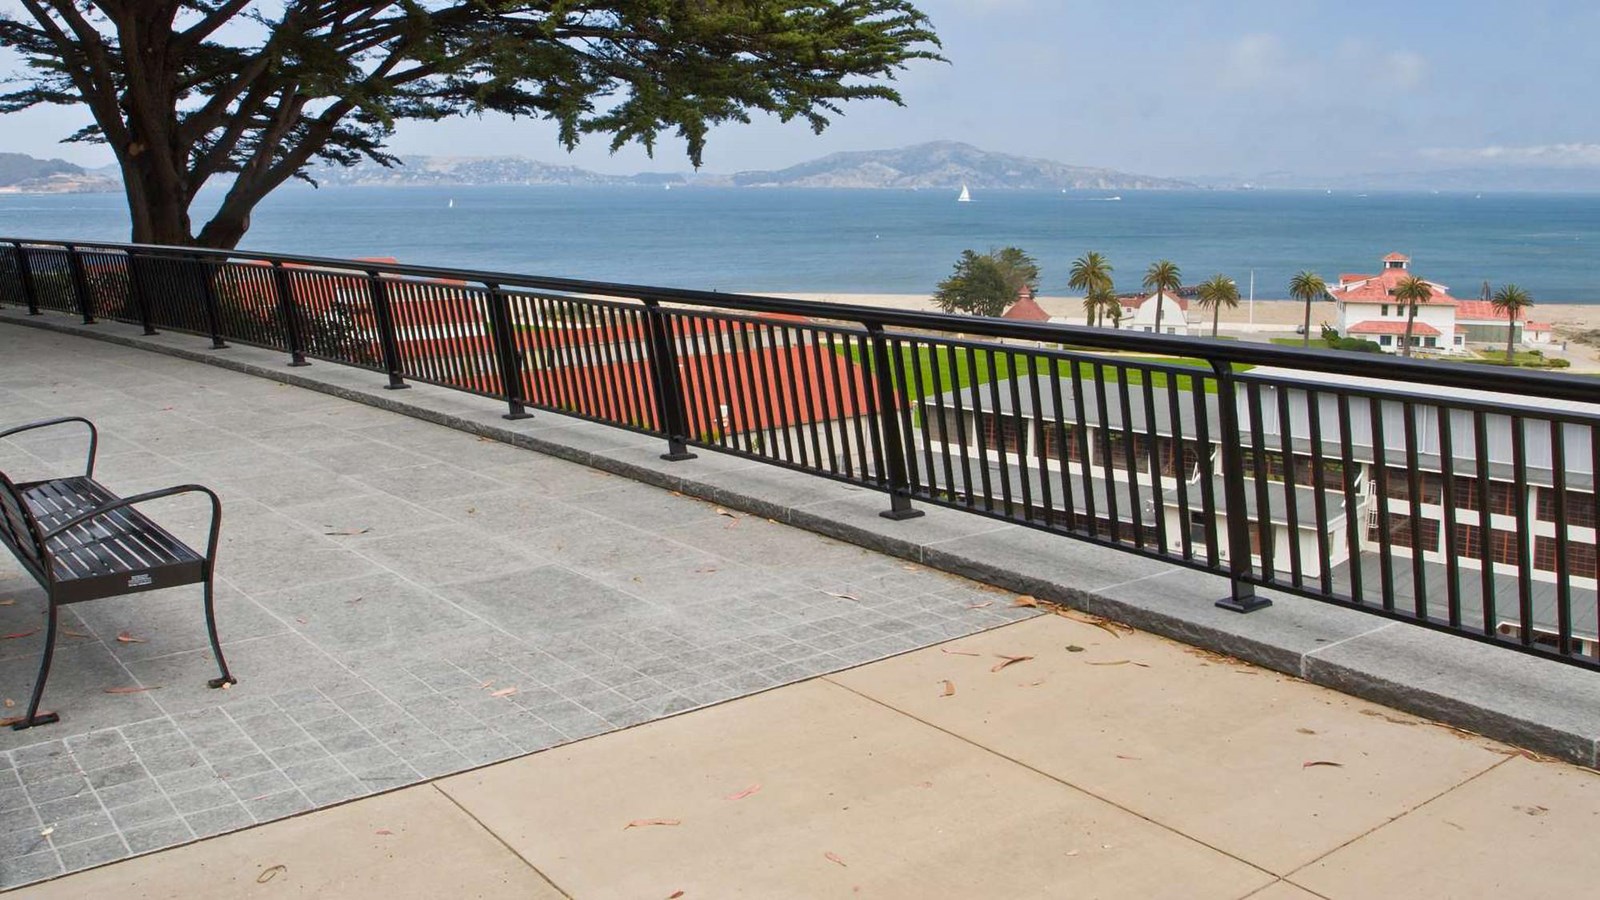 A bench and railing at the Crissy Field Overlook.